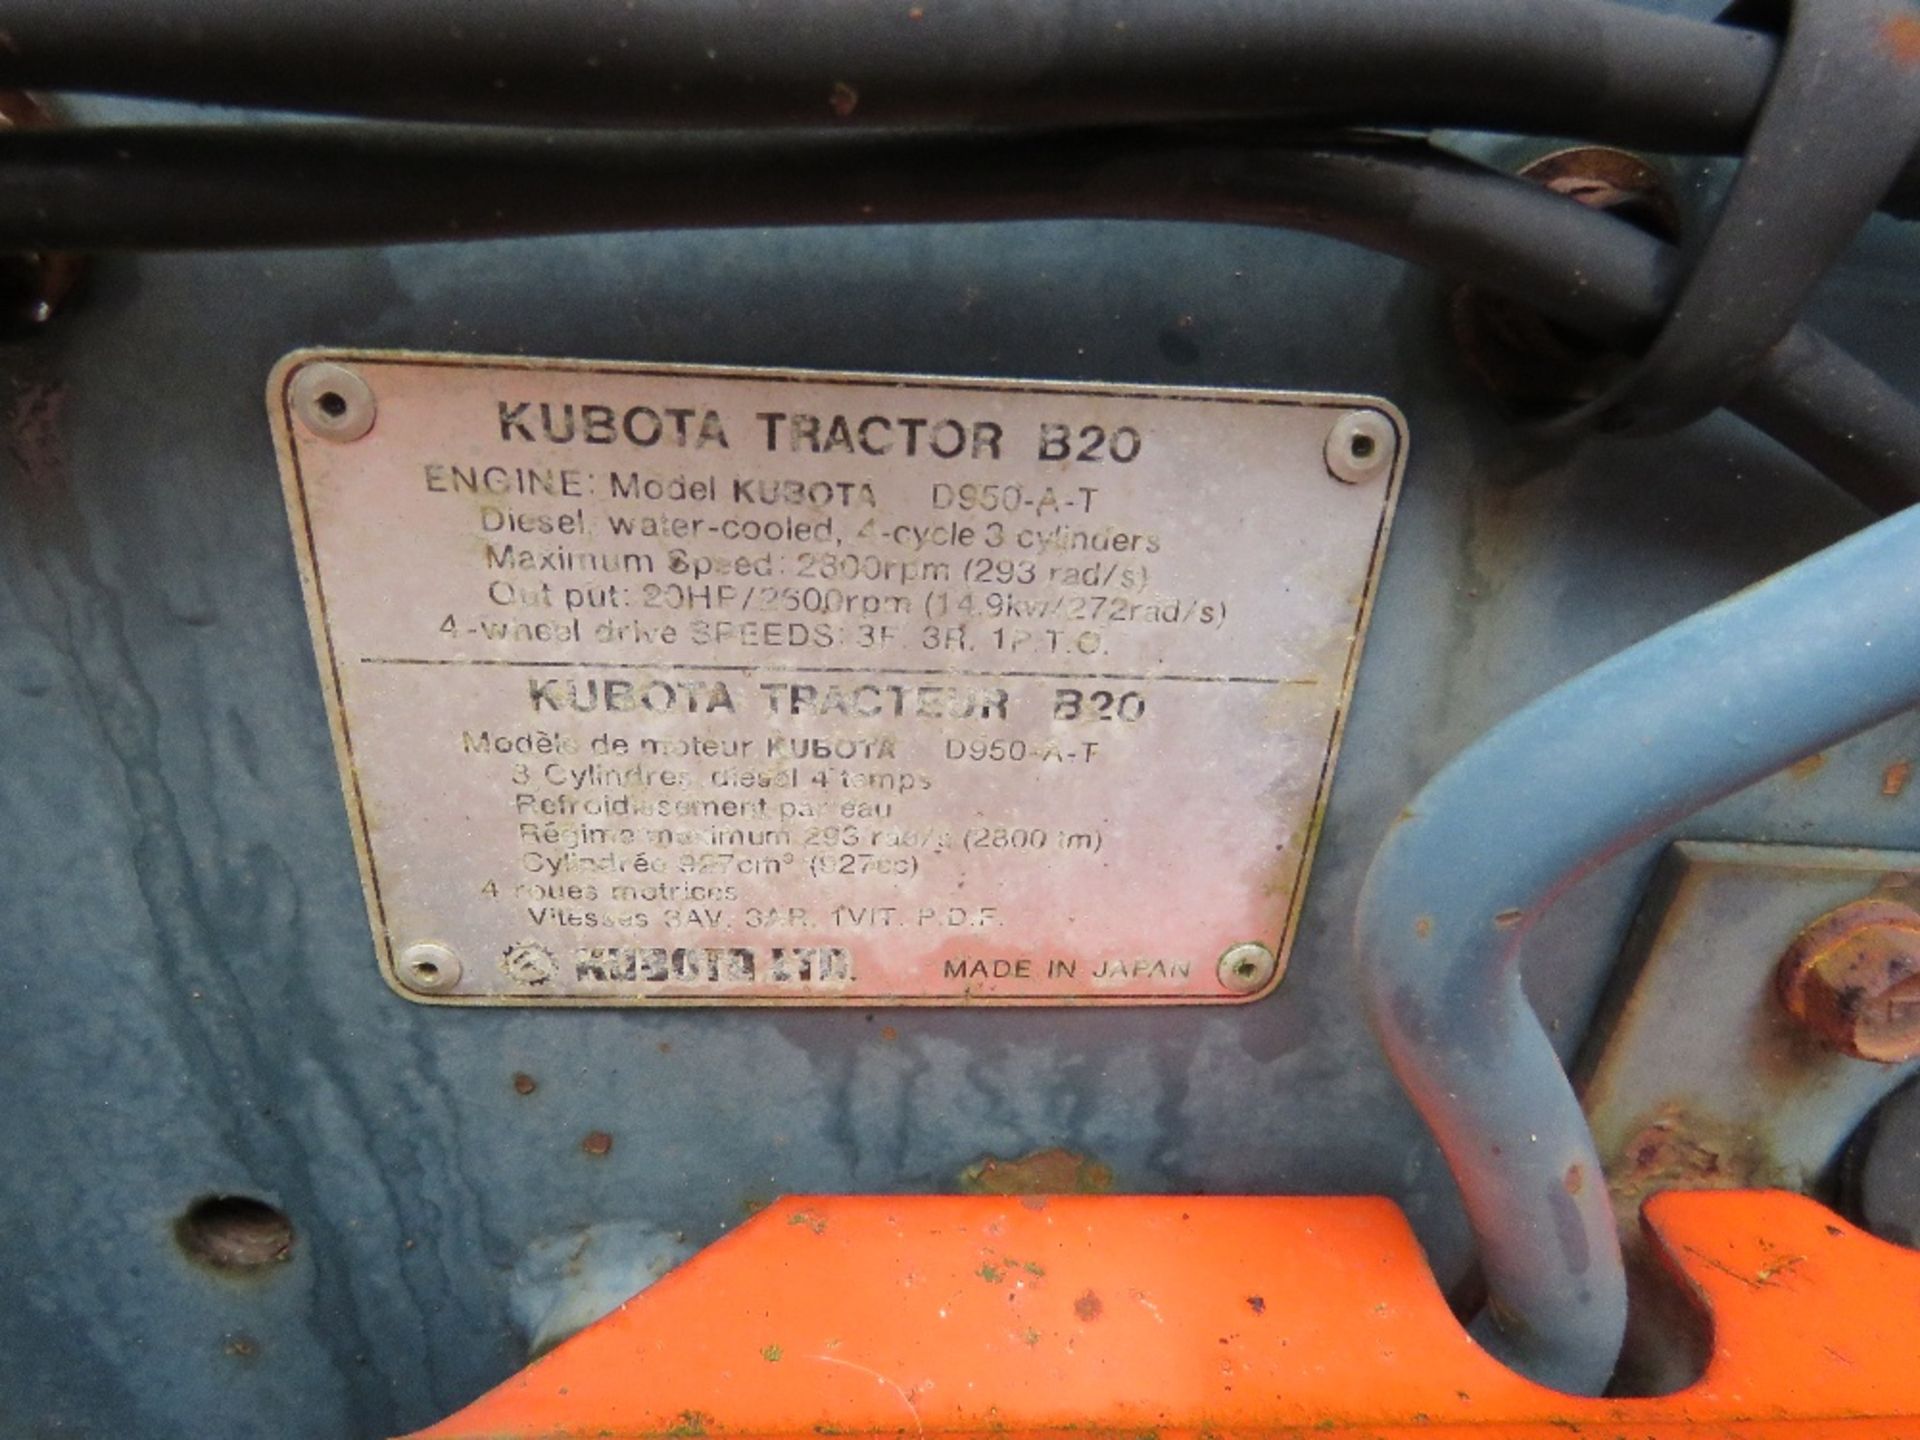 KUBOTA B20 4WD COMPACT LOADER TRACTOR WITH BACKHOE DIGGER. HYDRASTATIC DRIVE. 969 REC HOURS. WHEN TE - Image 11 of 13